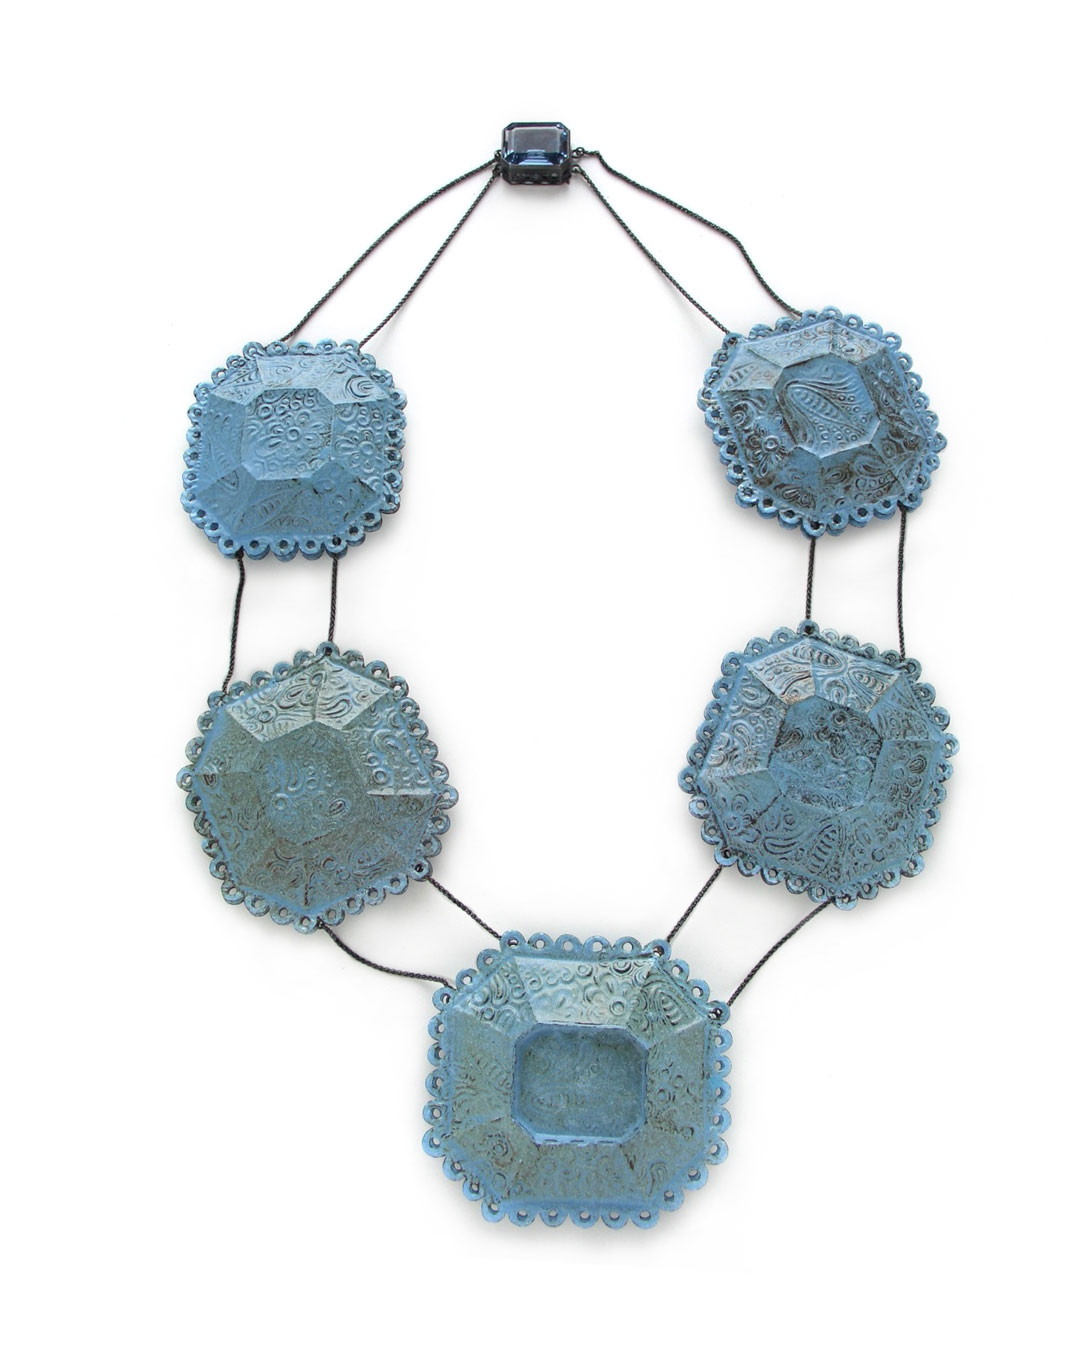 Vera Siemund, untitled, 2005, necklace; enamel, copper, synthetic spinel, H 300 mm, €4370